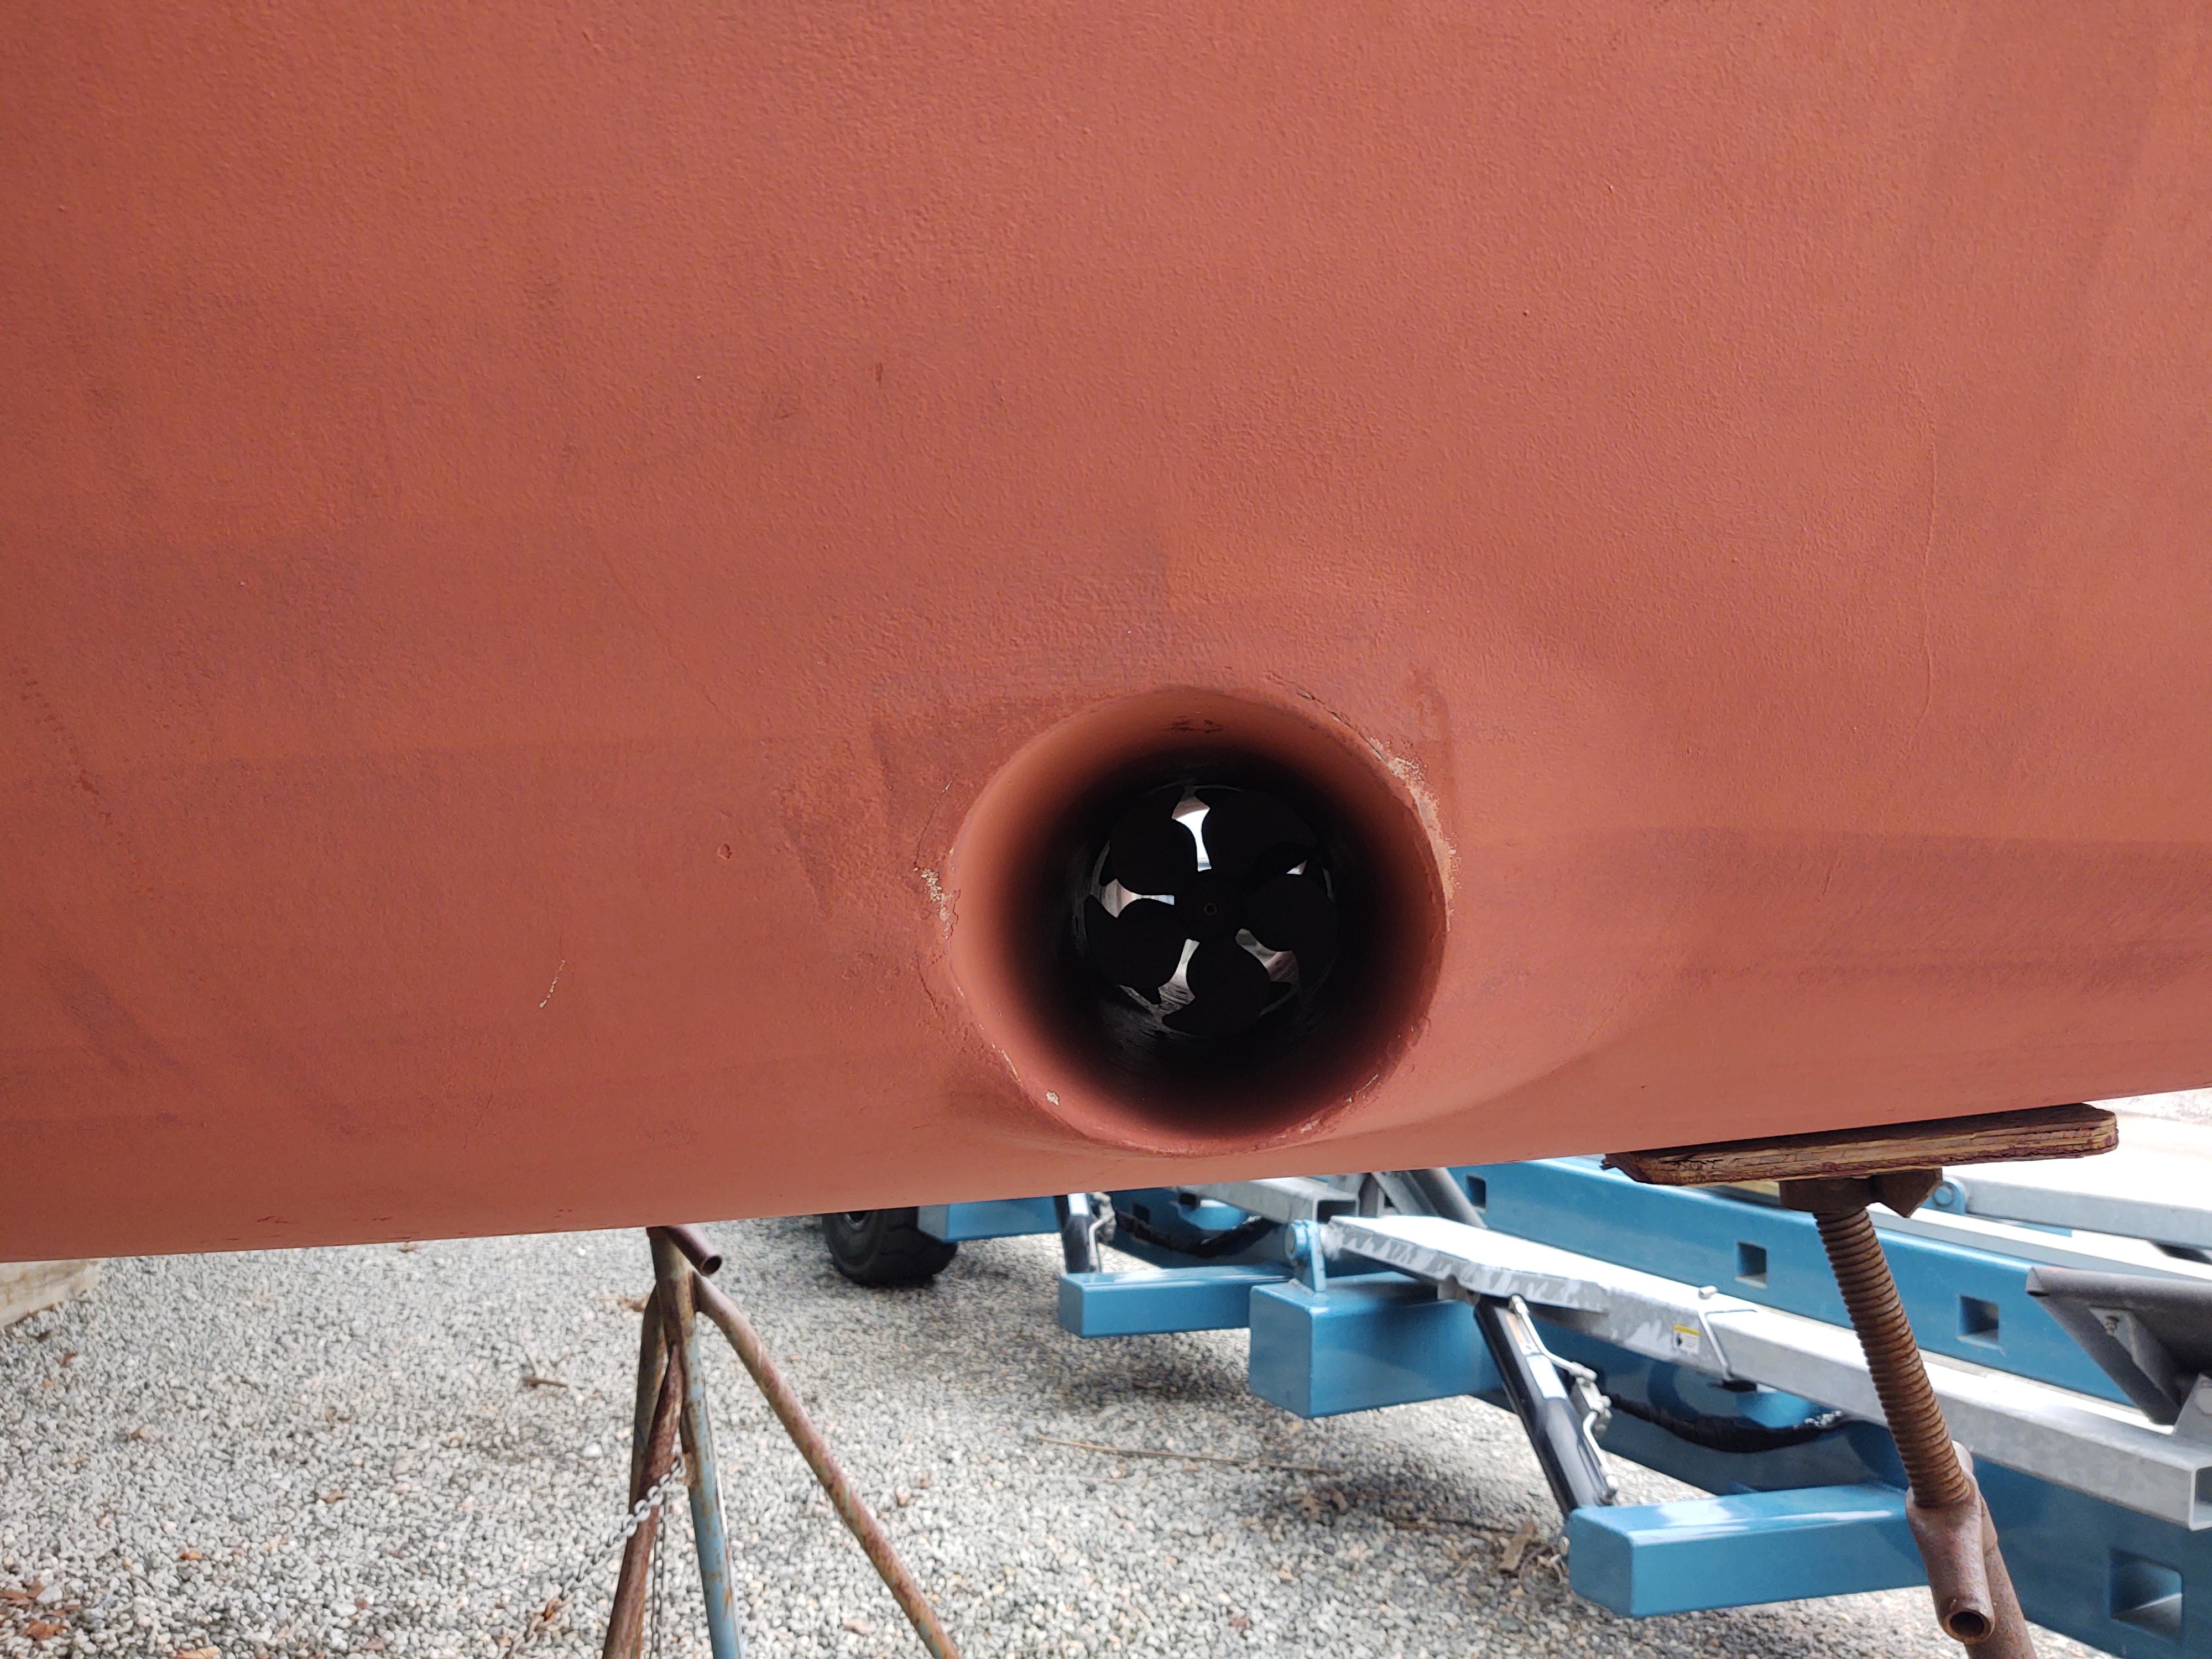 Sabre 386 Synergy bow thruster